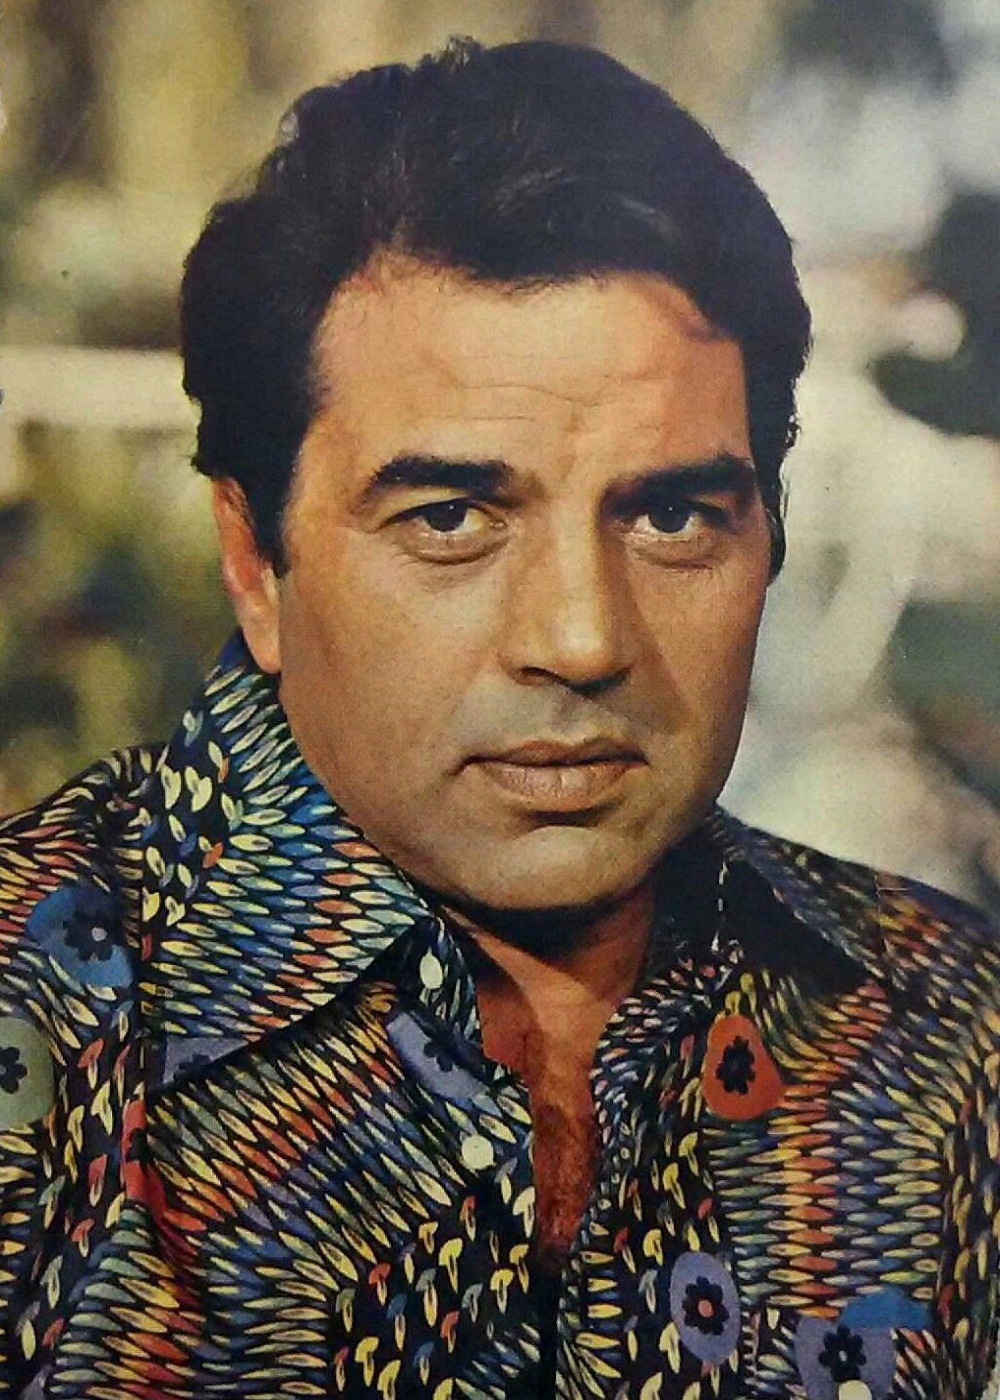 Actor Dharmendra's new restaurant name will be Hee-Man